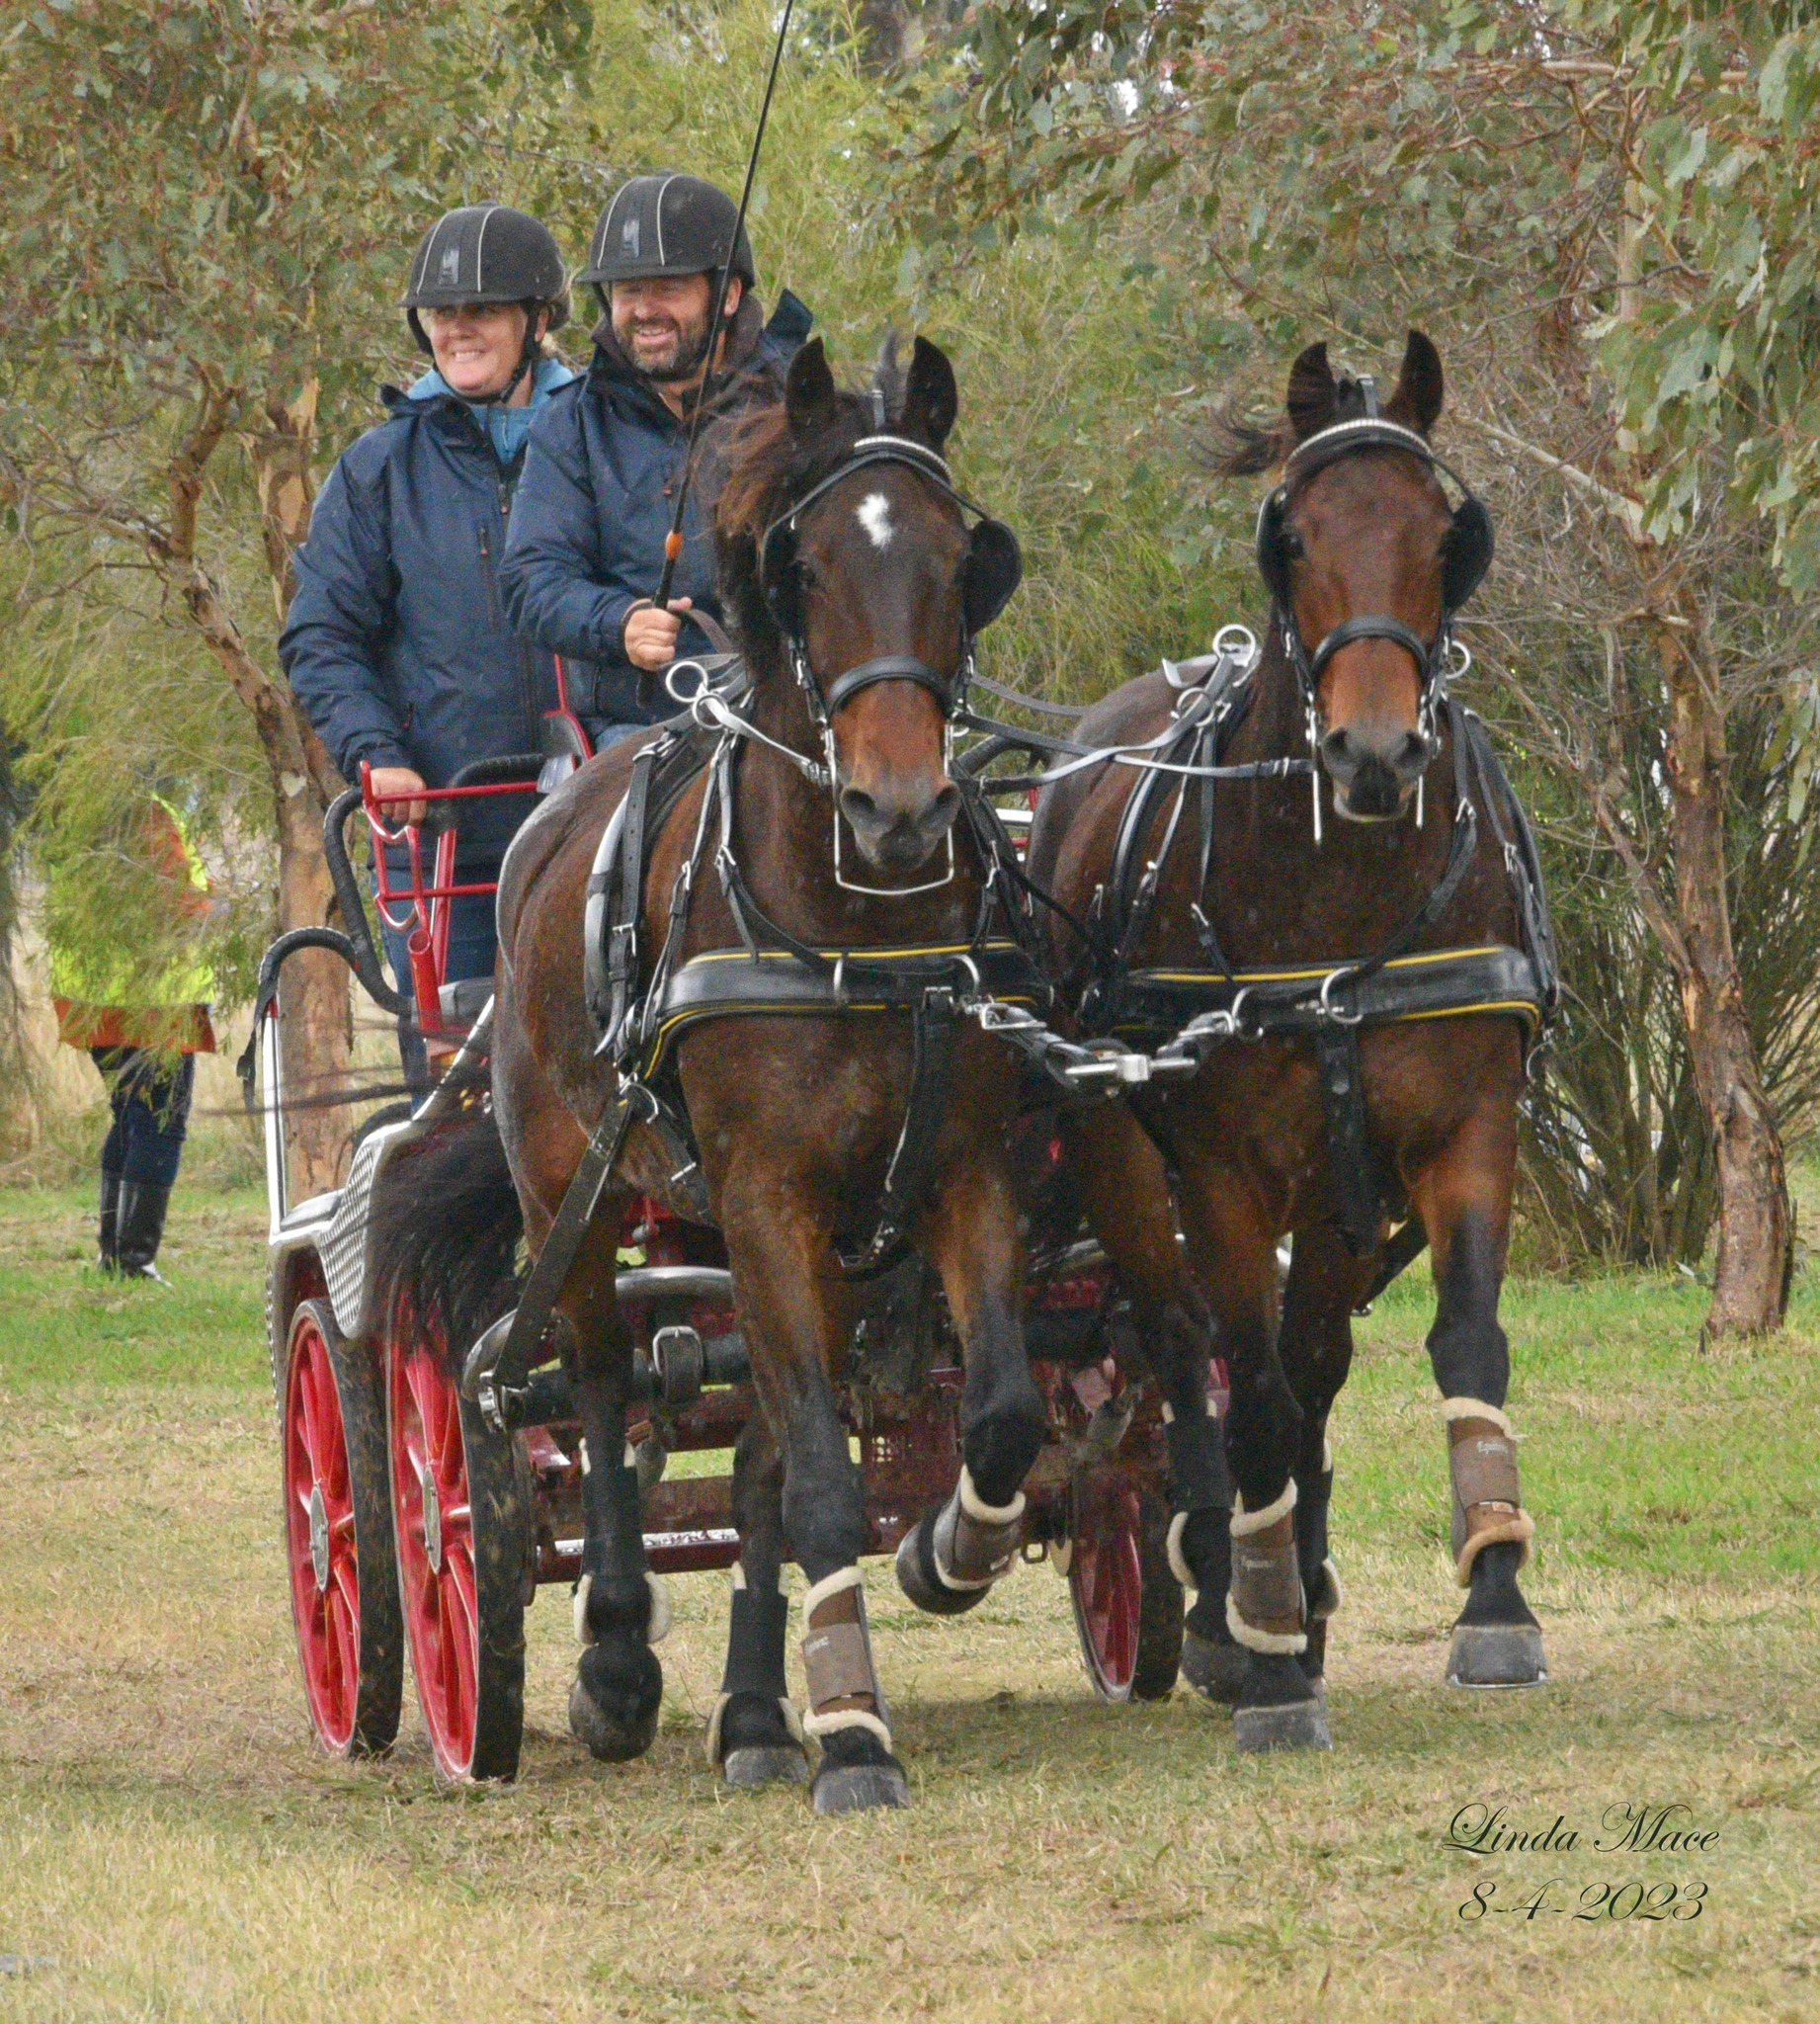 pair of horses being driven on marathon course